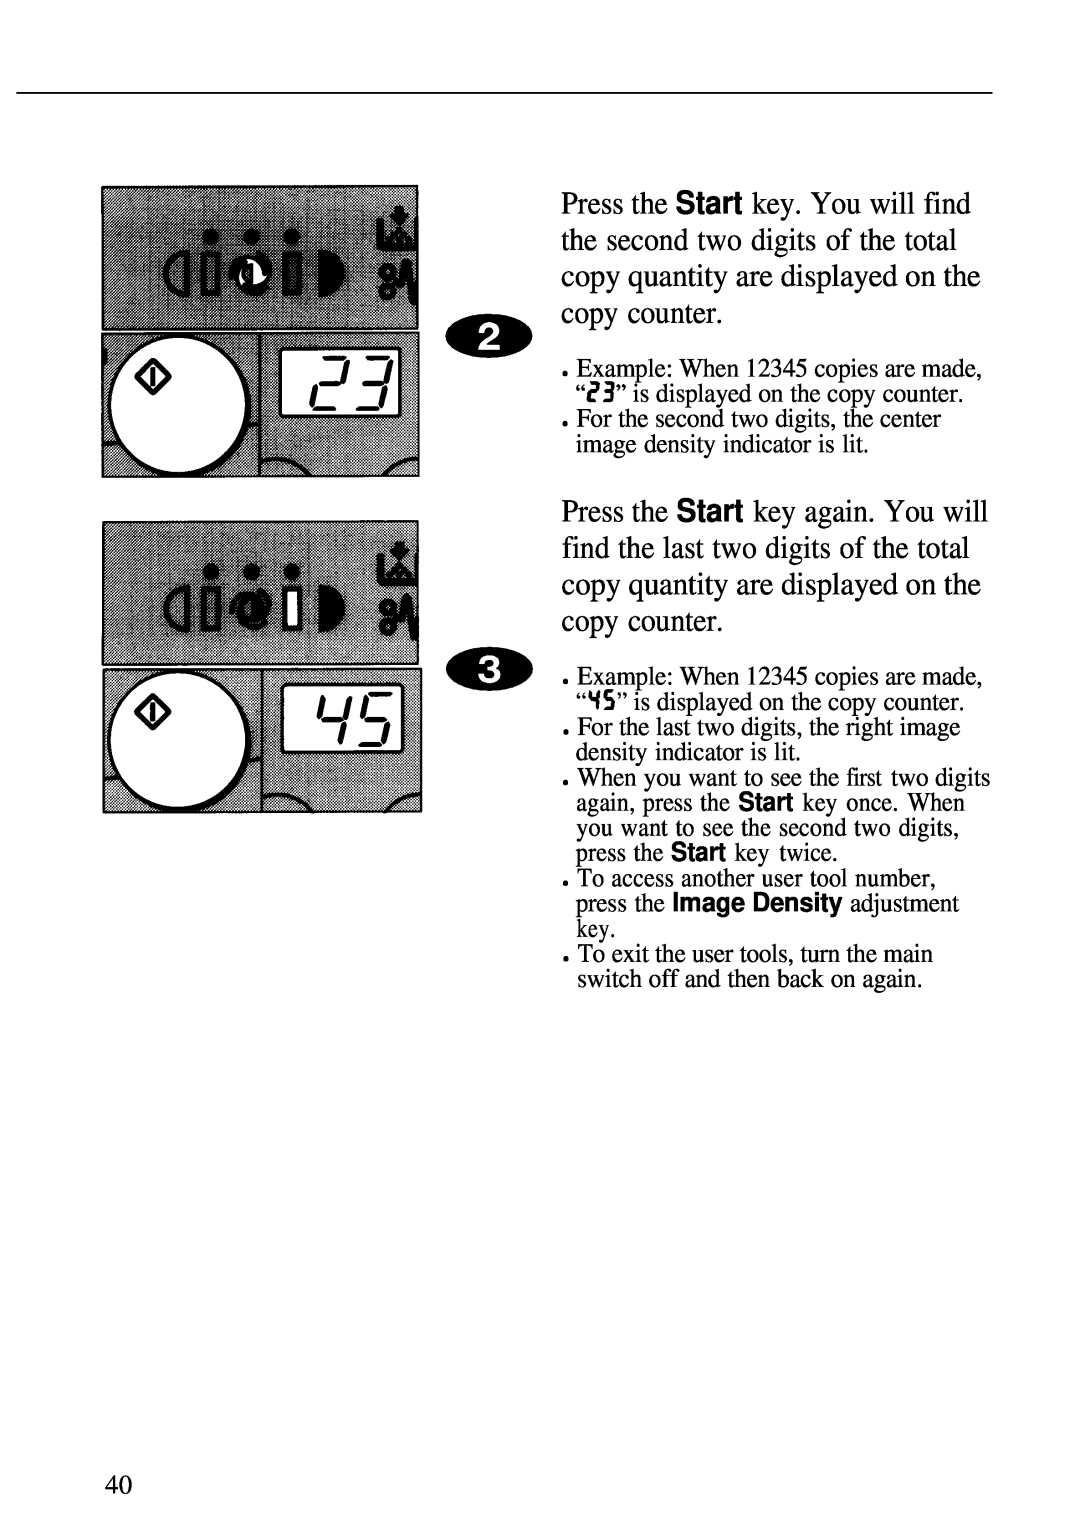 Ricoh 1008, FT1208 manual For the second two digits, the center image density indicator is lit 